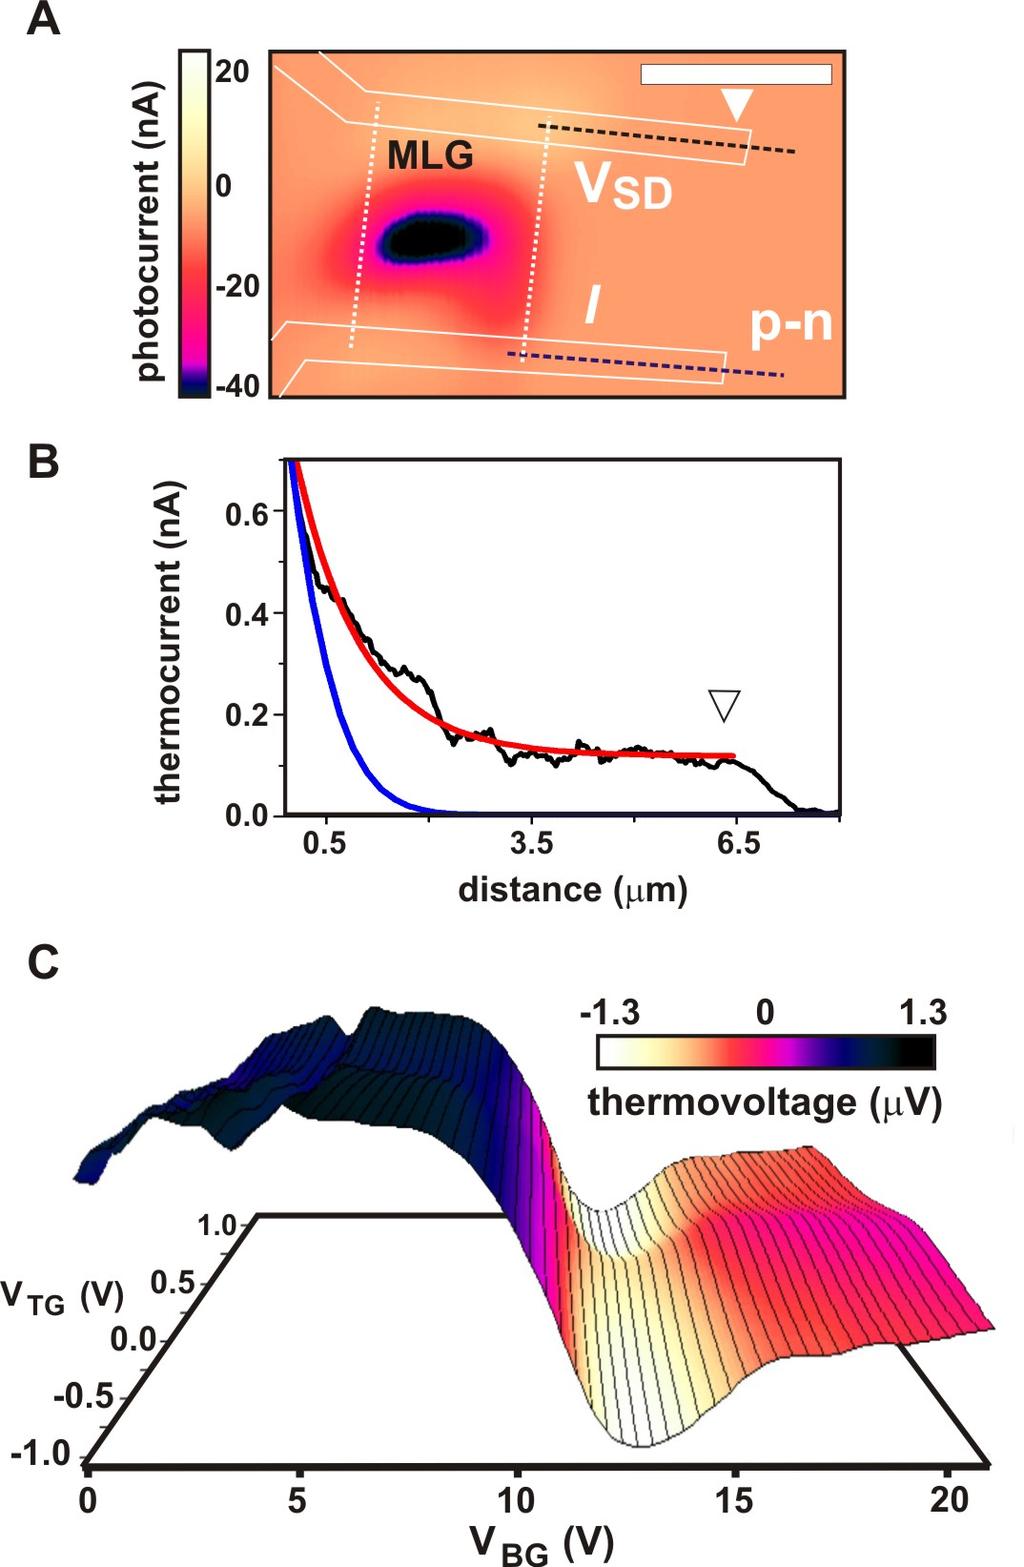 Fig. S2 Laser-induced heating of the electrode and thermoelectric measurements in the graphene p-n junction.